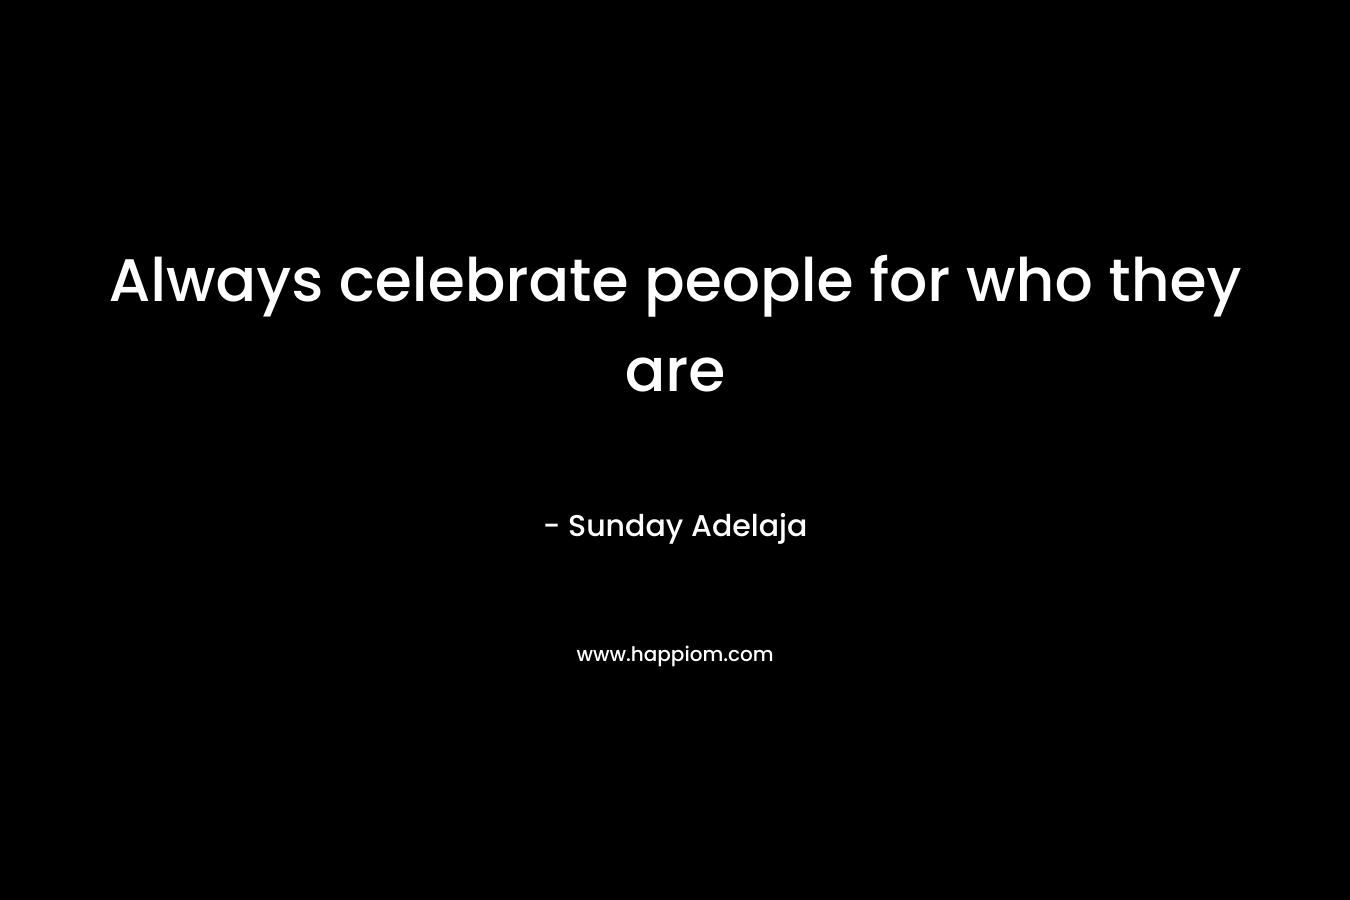 Always celebrate people for who they are